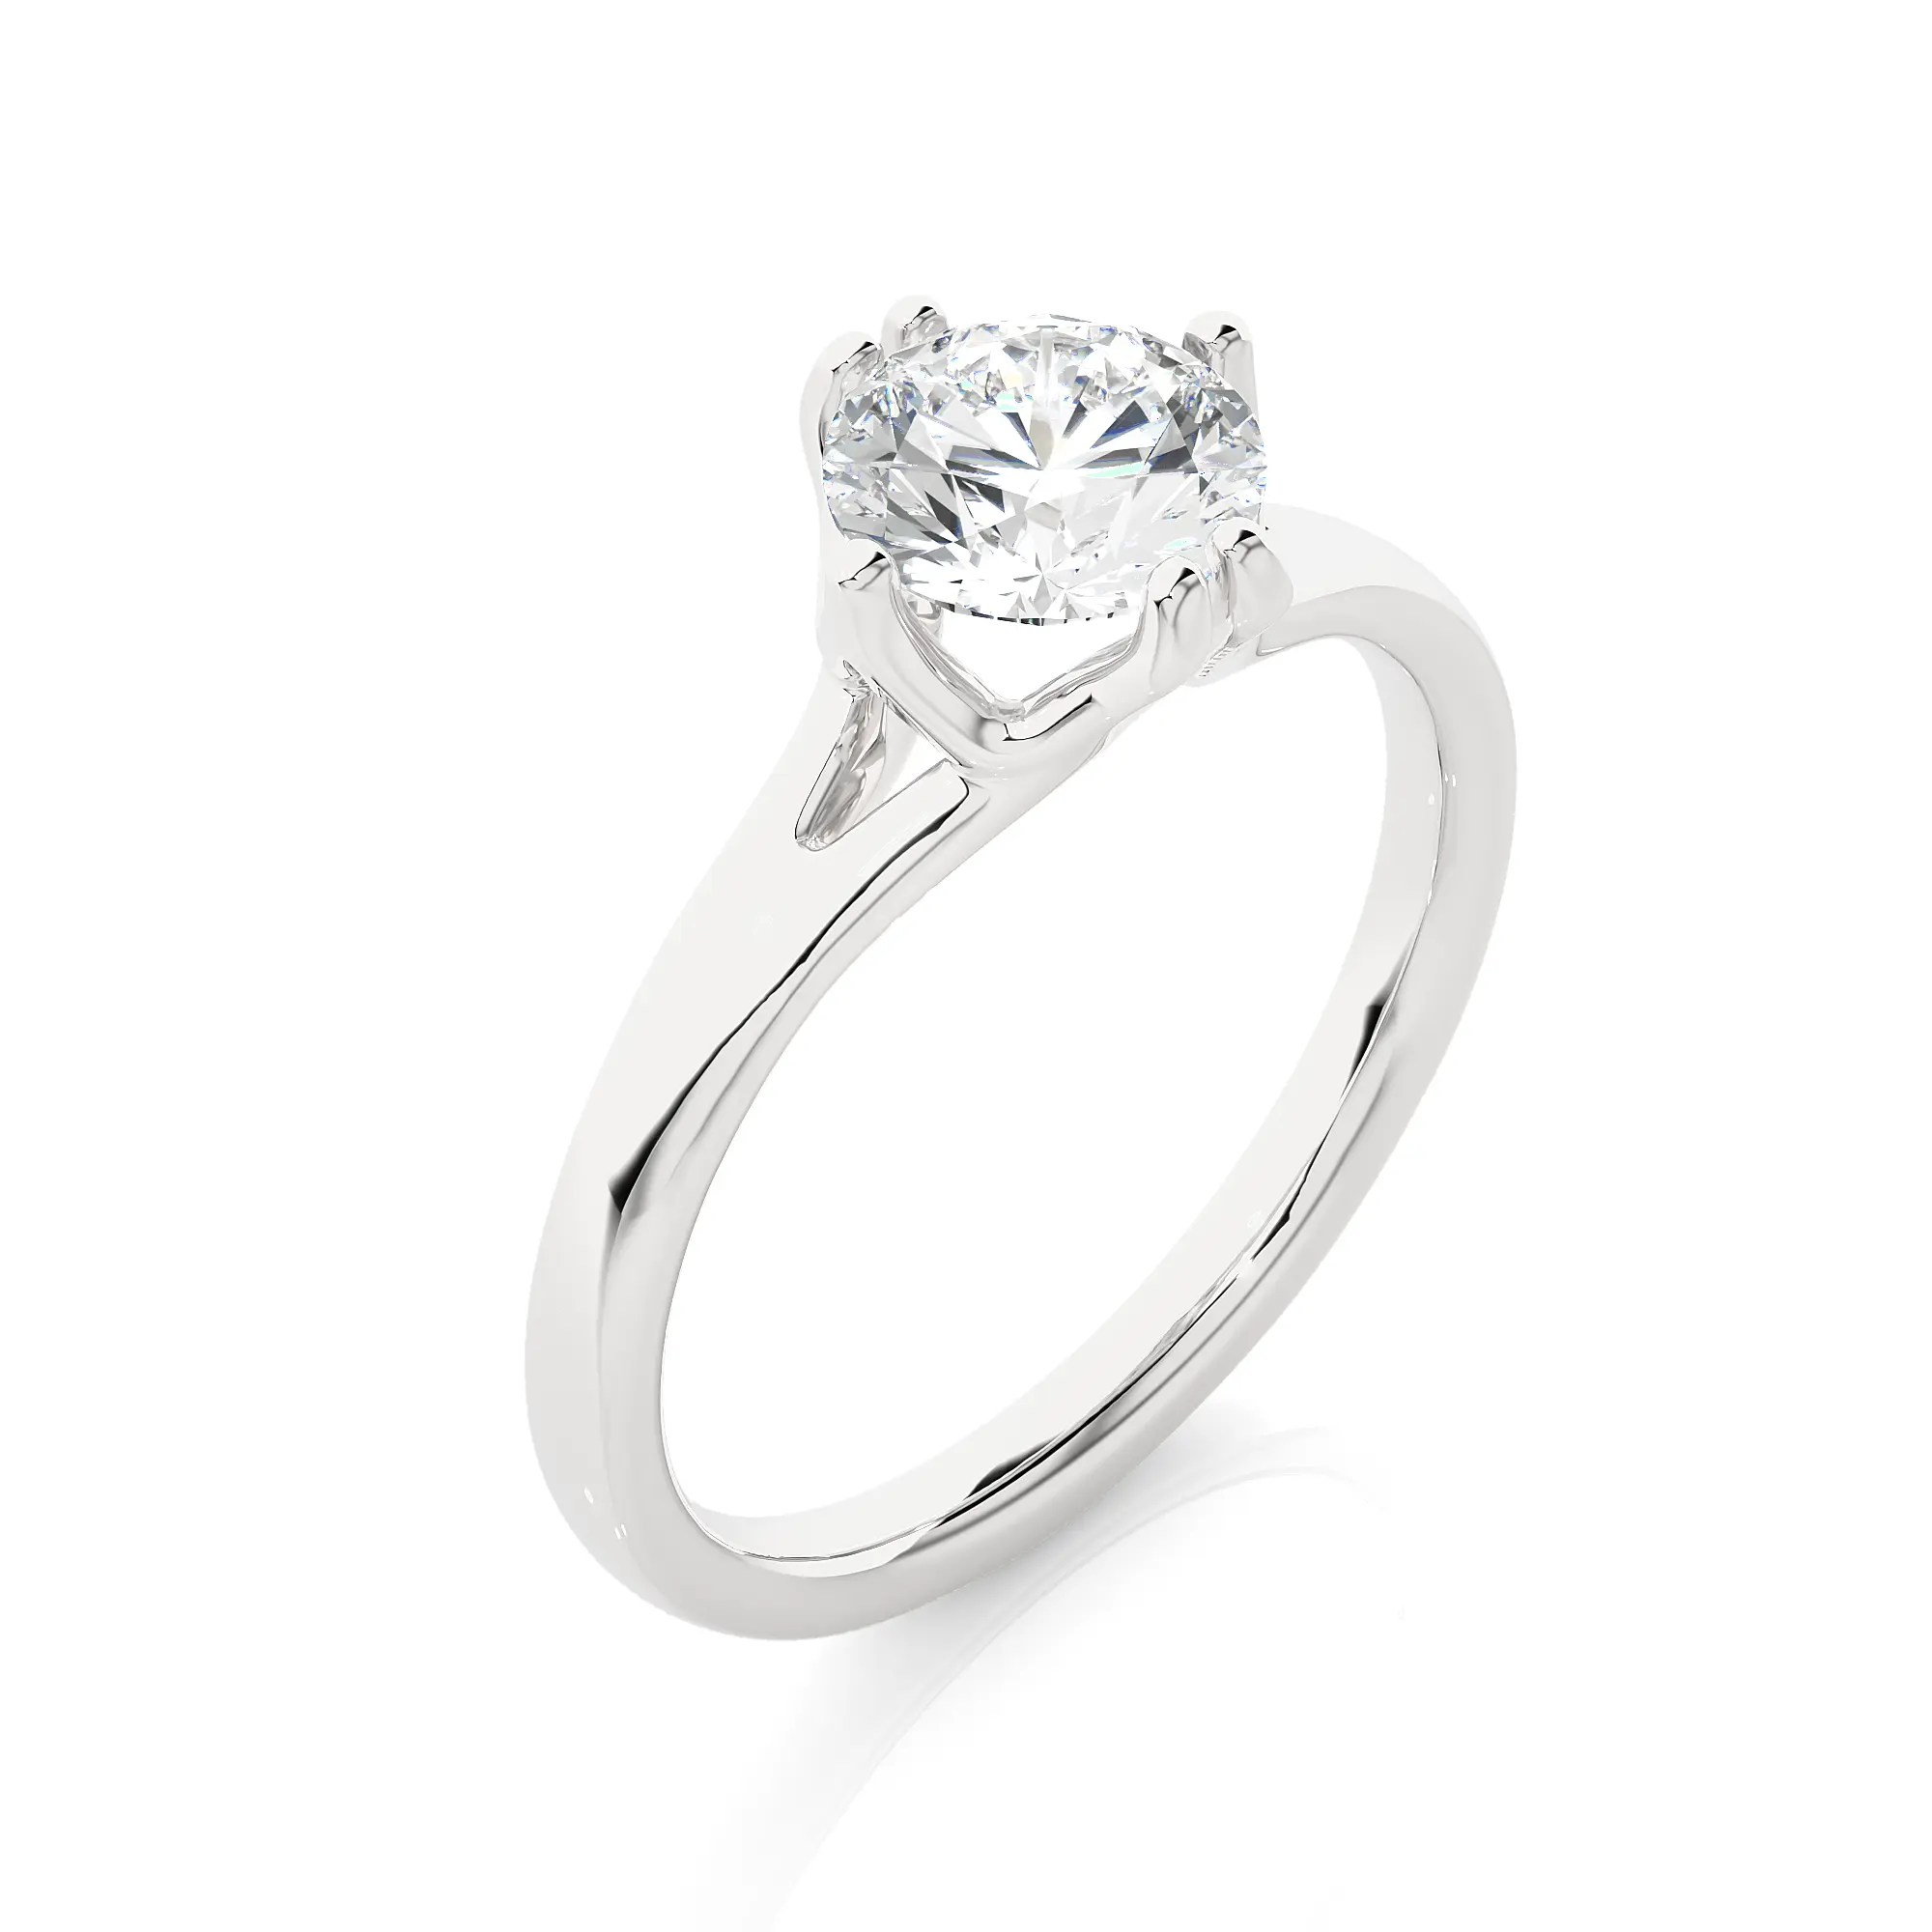 Engagement diamond rings - Engagement diamond rings Manufacturers Suppliers  Wholesalers in India